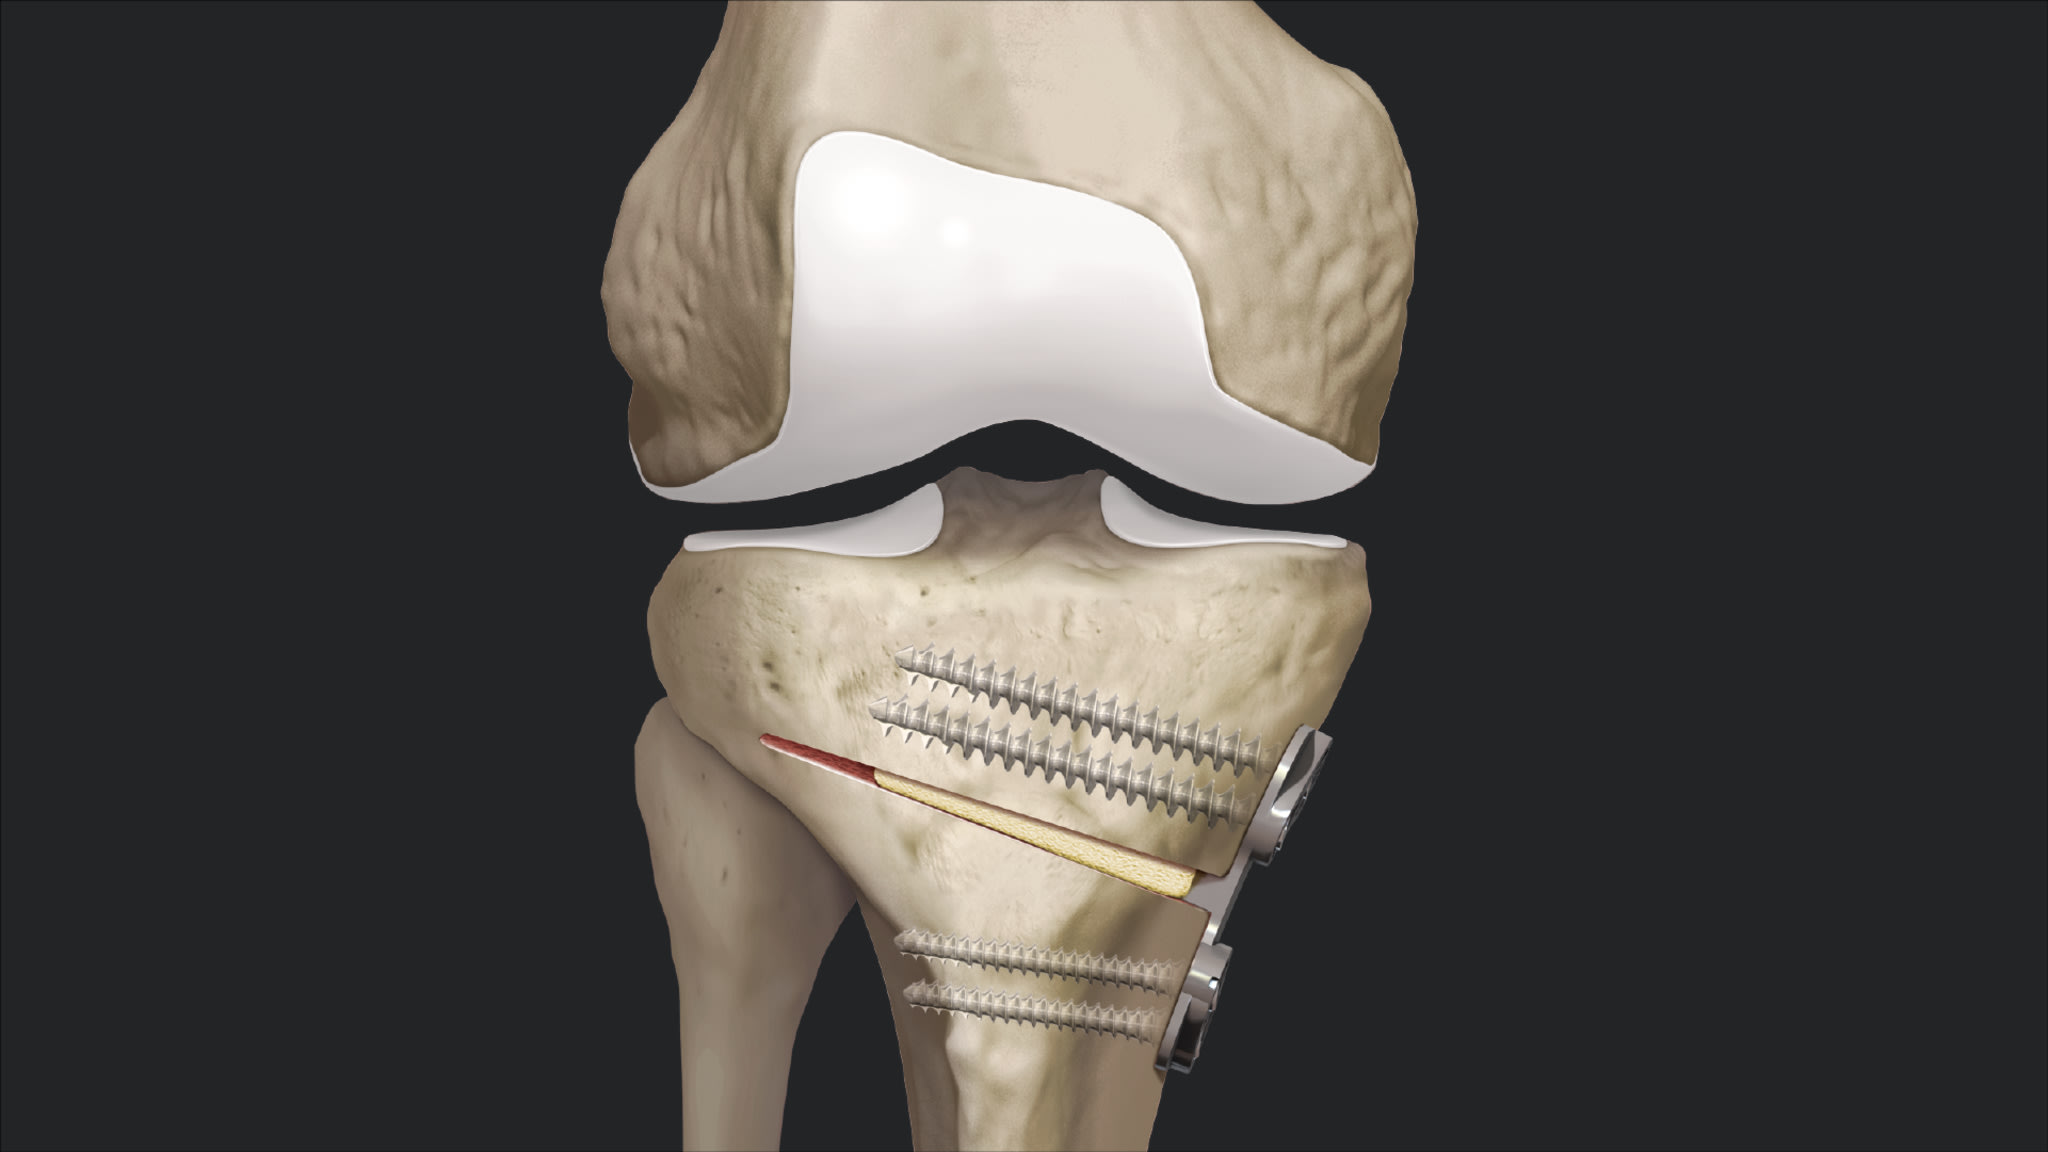 High Tibial Osteotomy Using Tibial Opening Wedge Osteotomy Plates